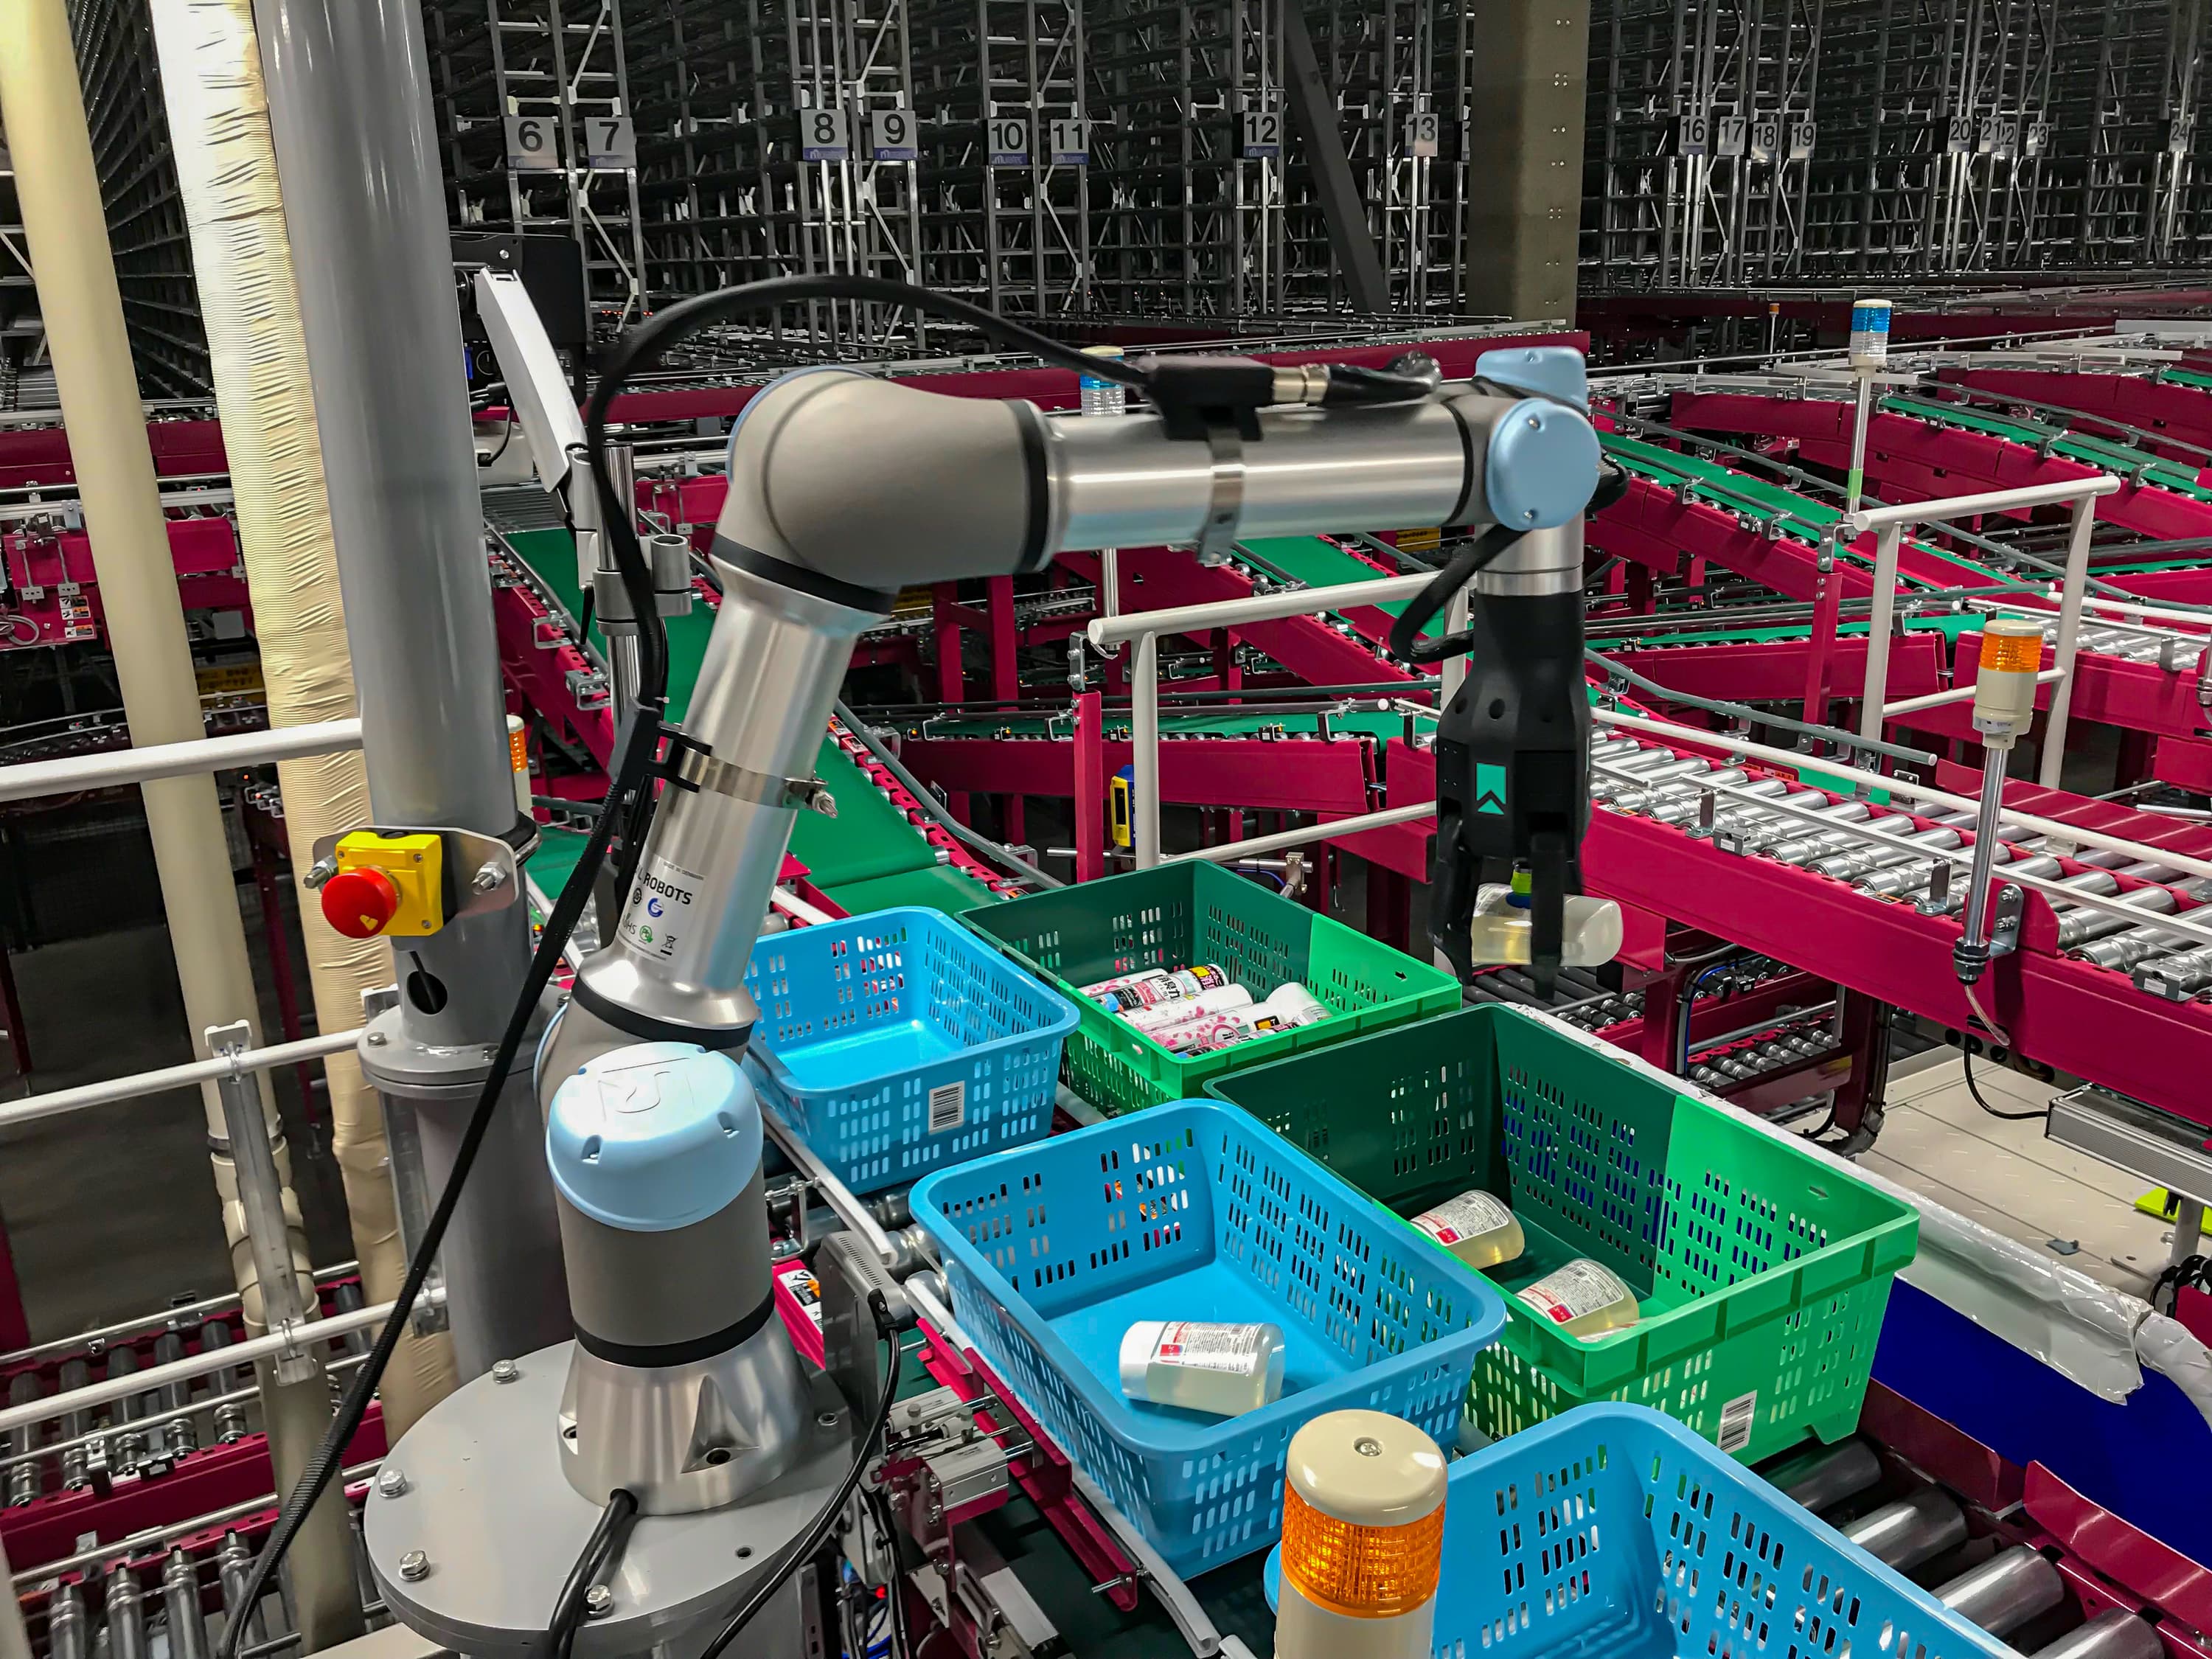 PALTAC Corporation partners with RightHand Robotics